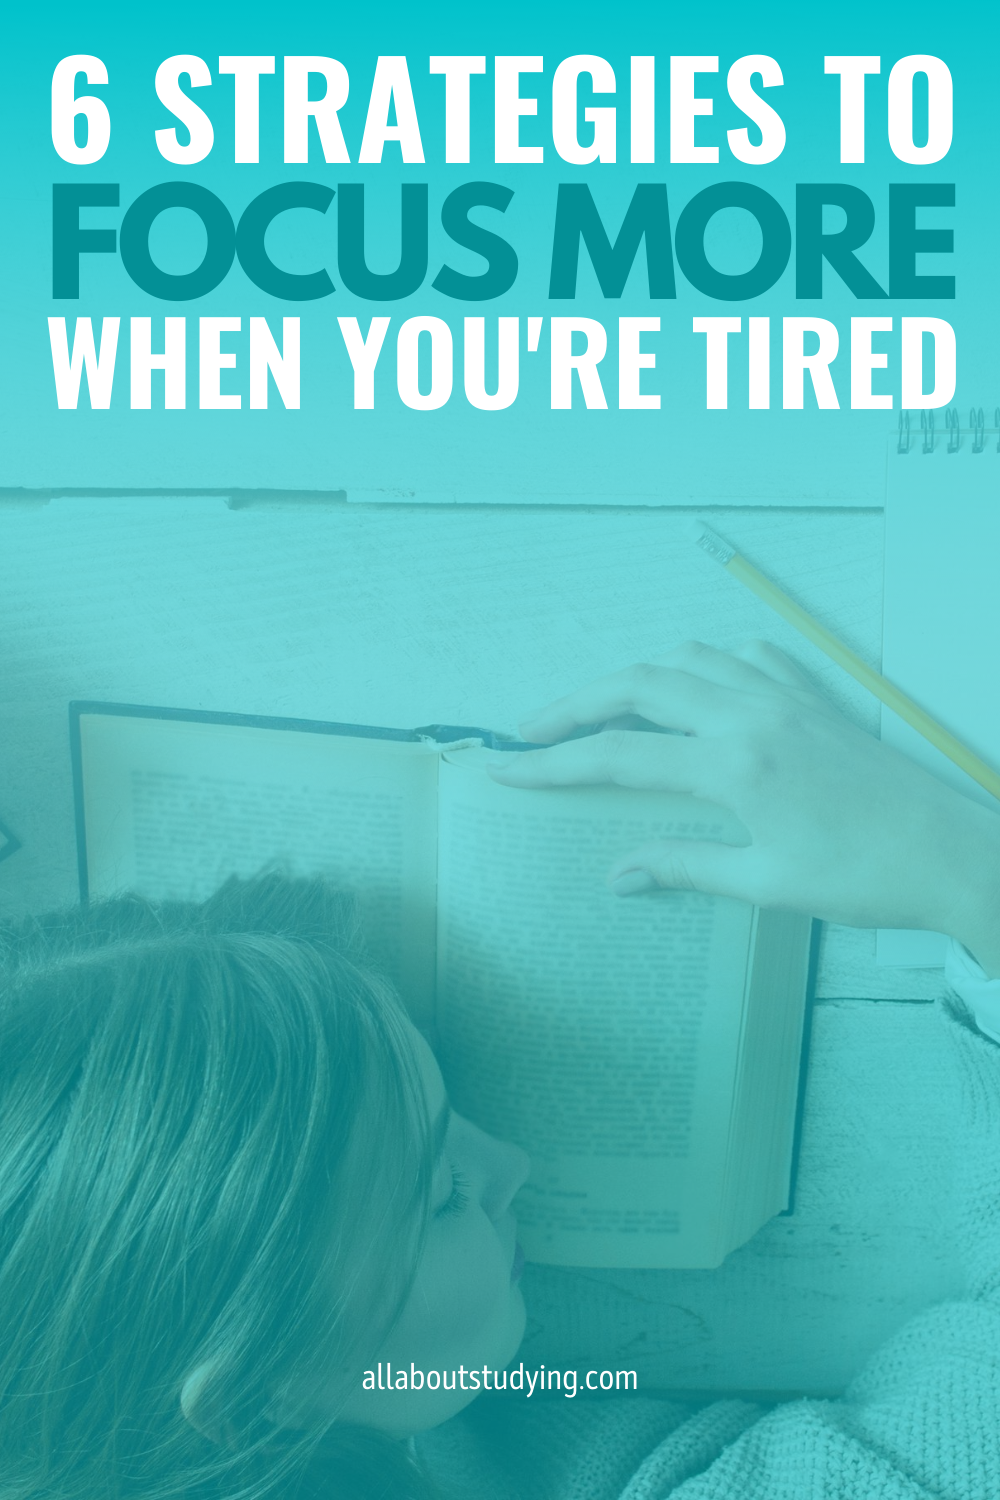 How To Focus When Tired_ 6 Tips To Stay Productive When You're Exhausted